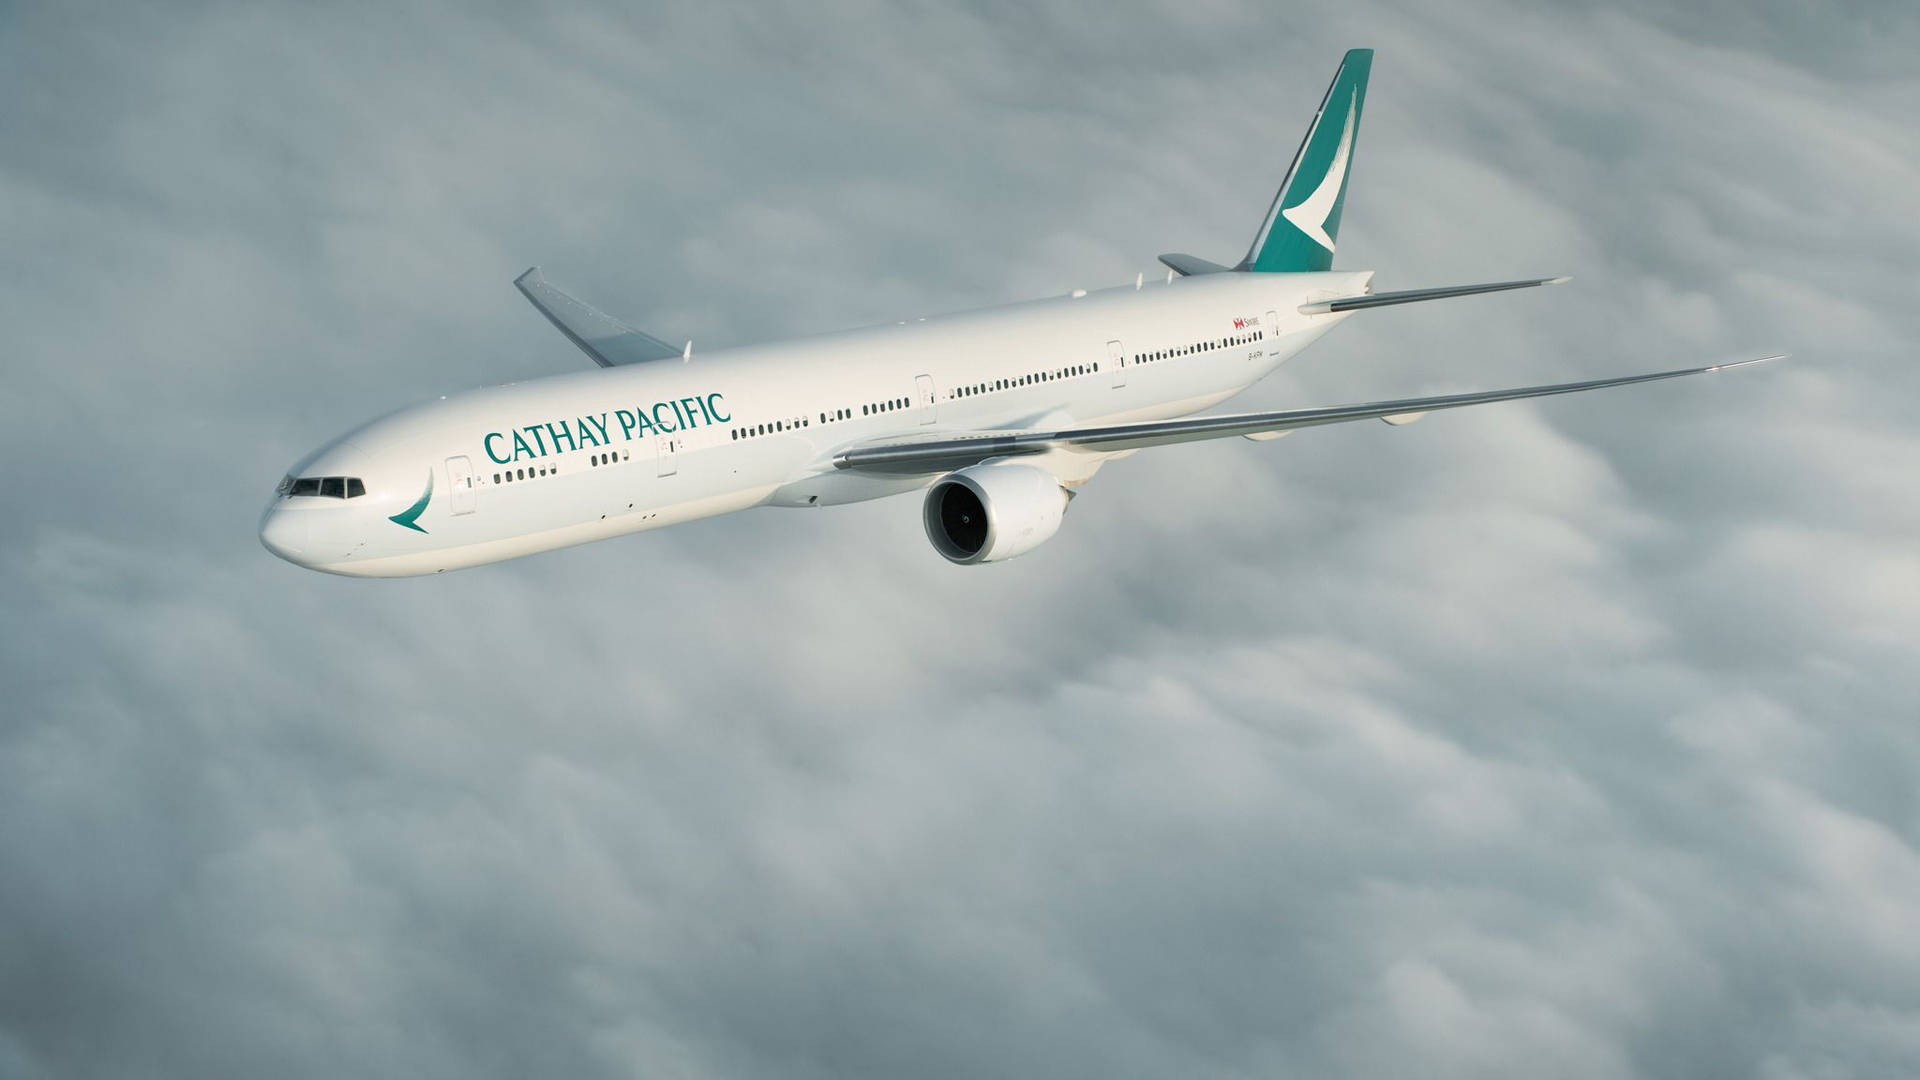 Cathay Pacific Aircraft Journey Wallpaper